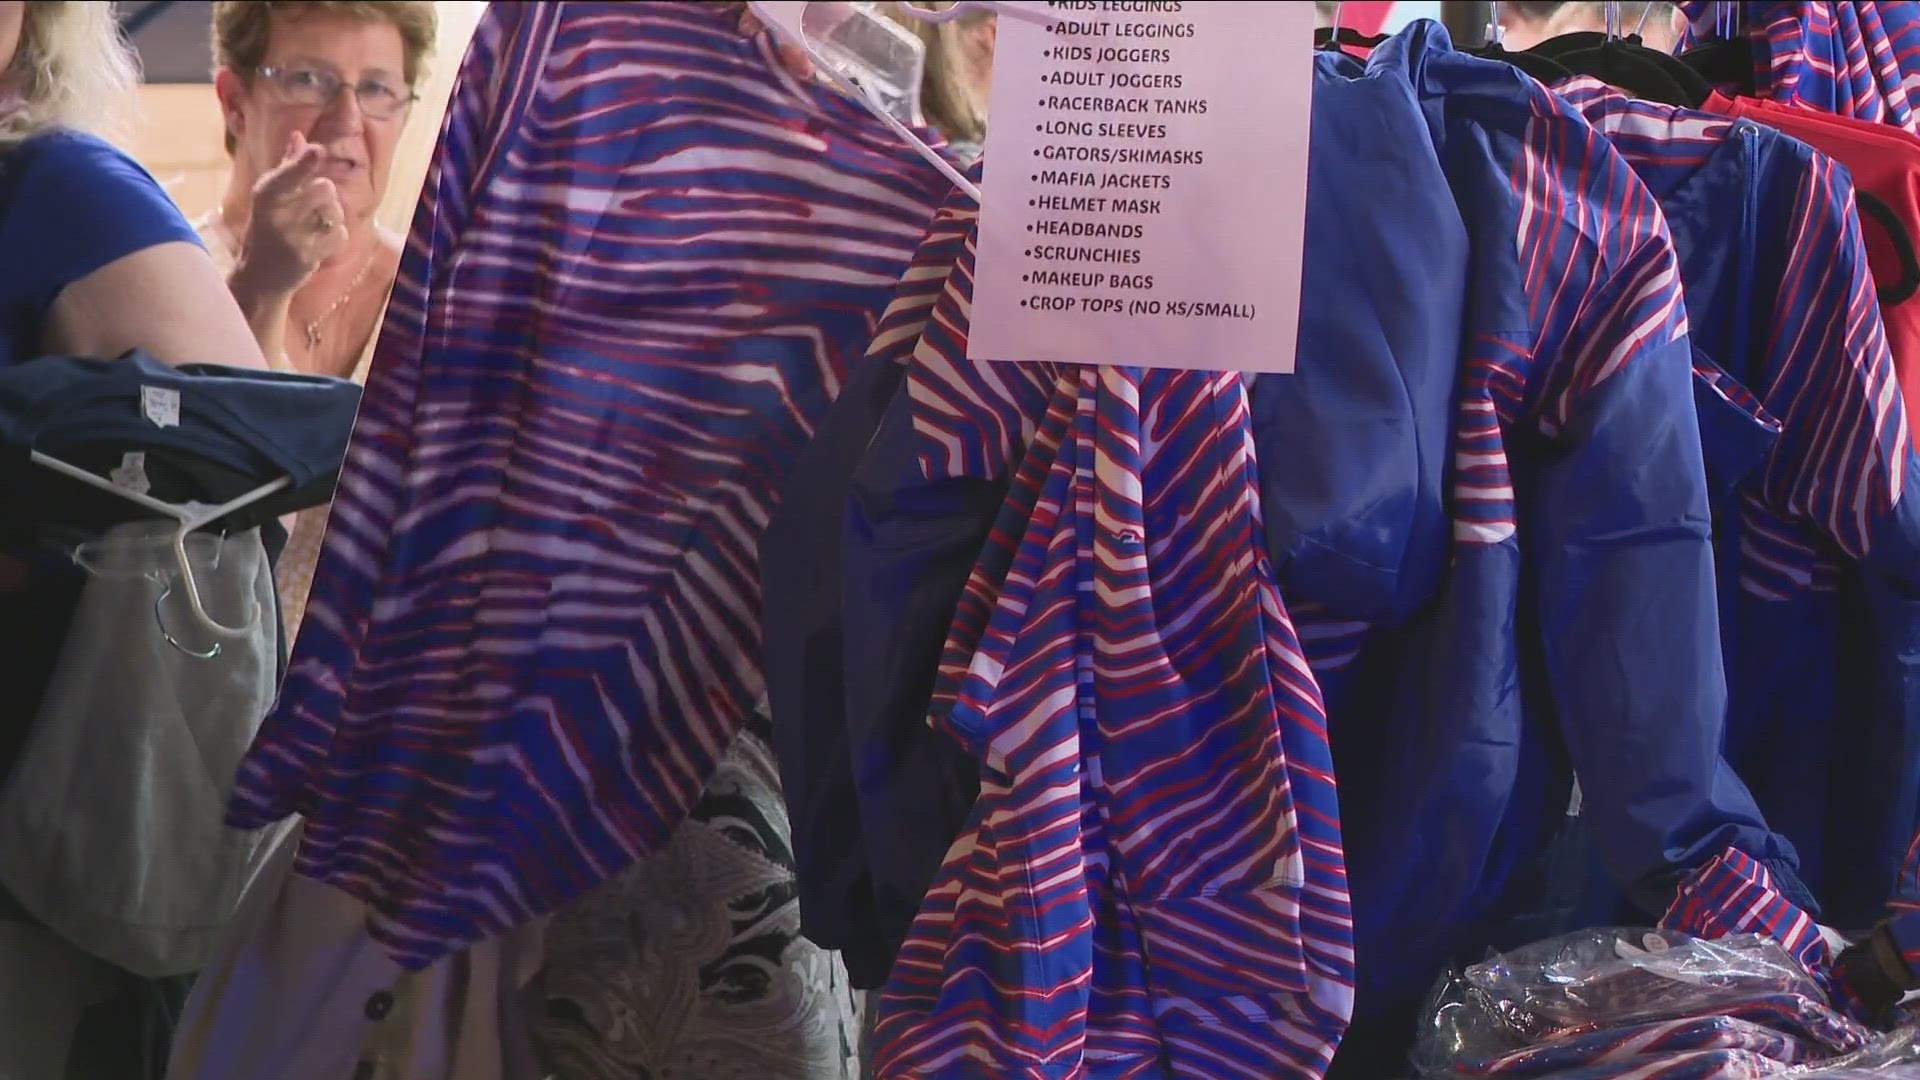 The event features over 50 local vendors selling artisan made Buffalo-inspired items.